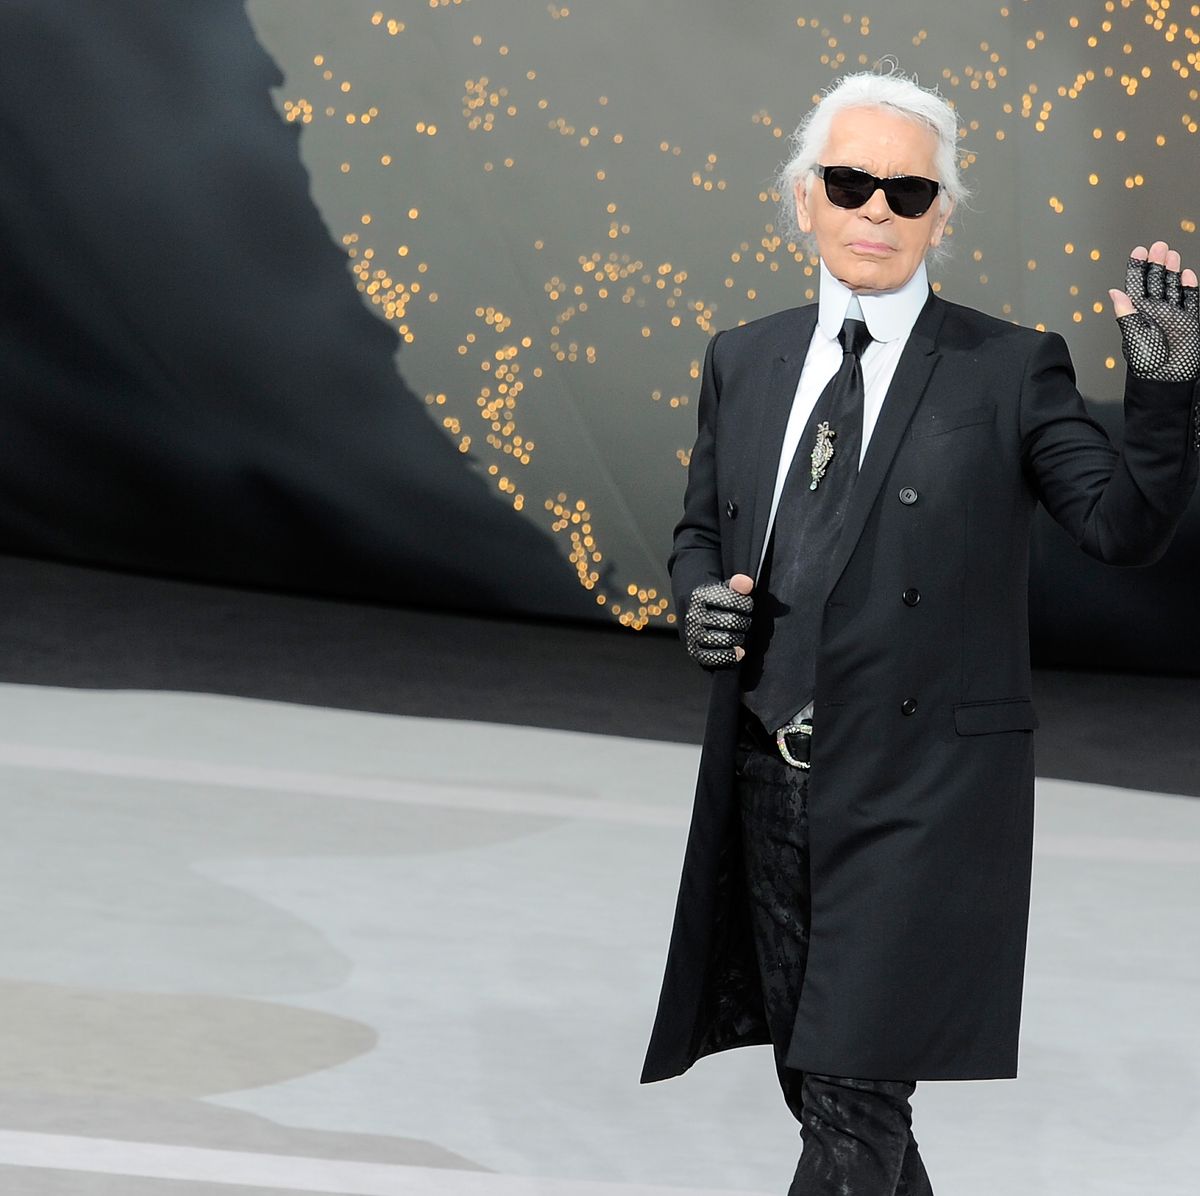 dood Zuidoost Zinloos Karl Lagerfeld Best Quotes - 9 Quotes from Karl Lagerfeld, Iconic Designer  for Chanel and Fendi